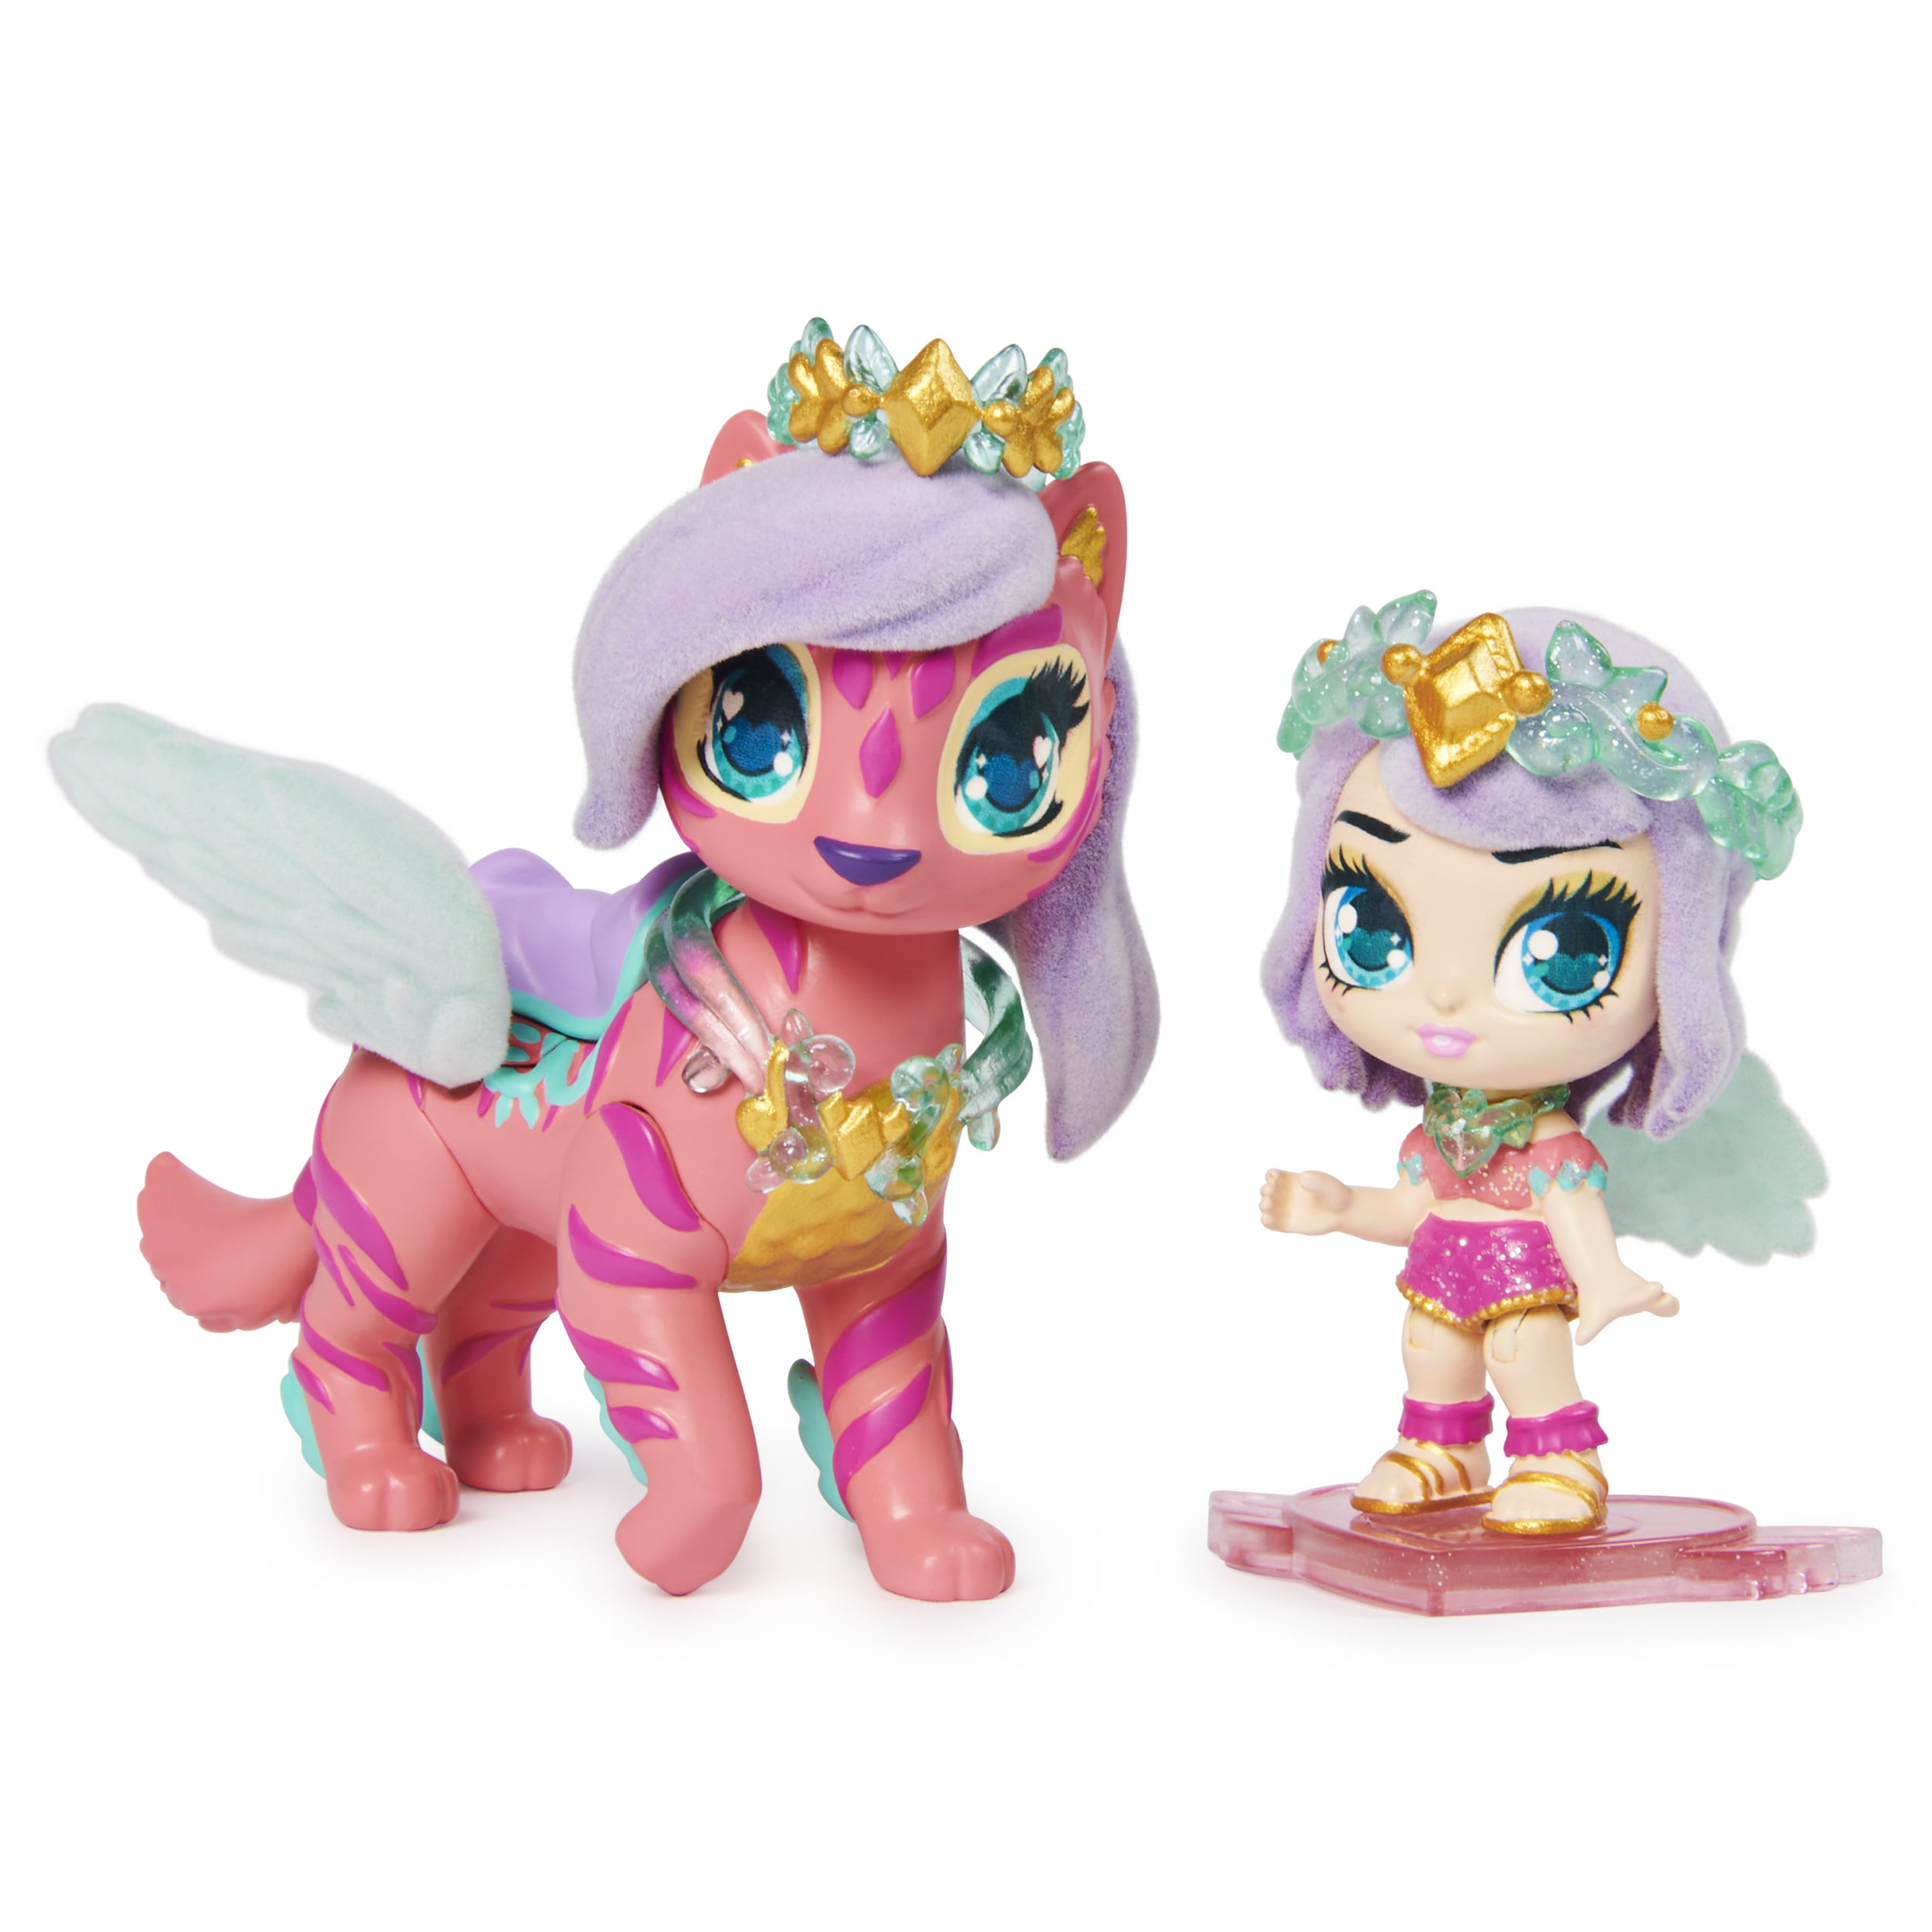 Hatchimals 20127461 Pixies Riders Radiant Roxy Pixie and TIGRETTE Glider Set for sale online 